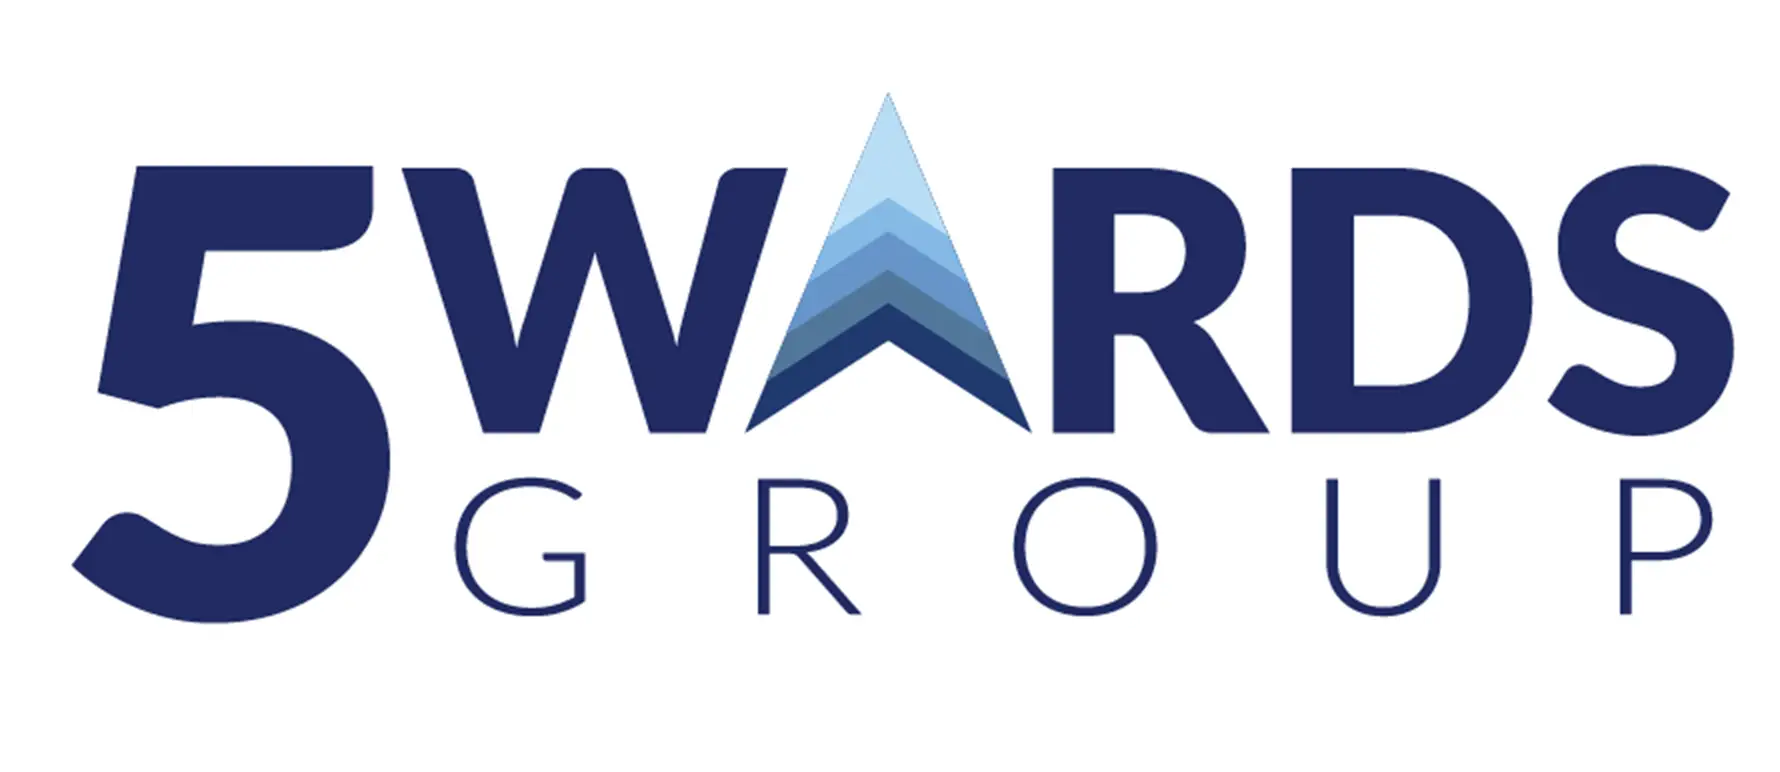 5 Wards Group Logo in dark blue and the A is like an arrow with shades of blue dark to light